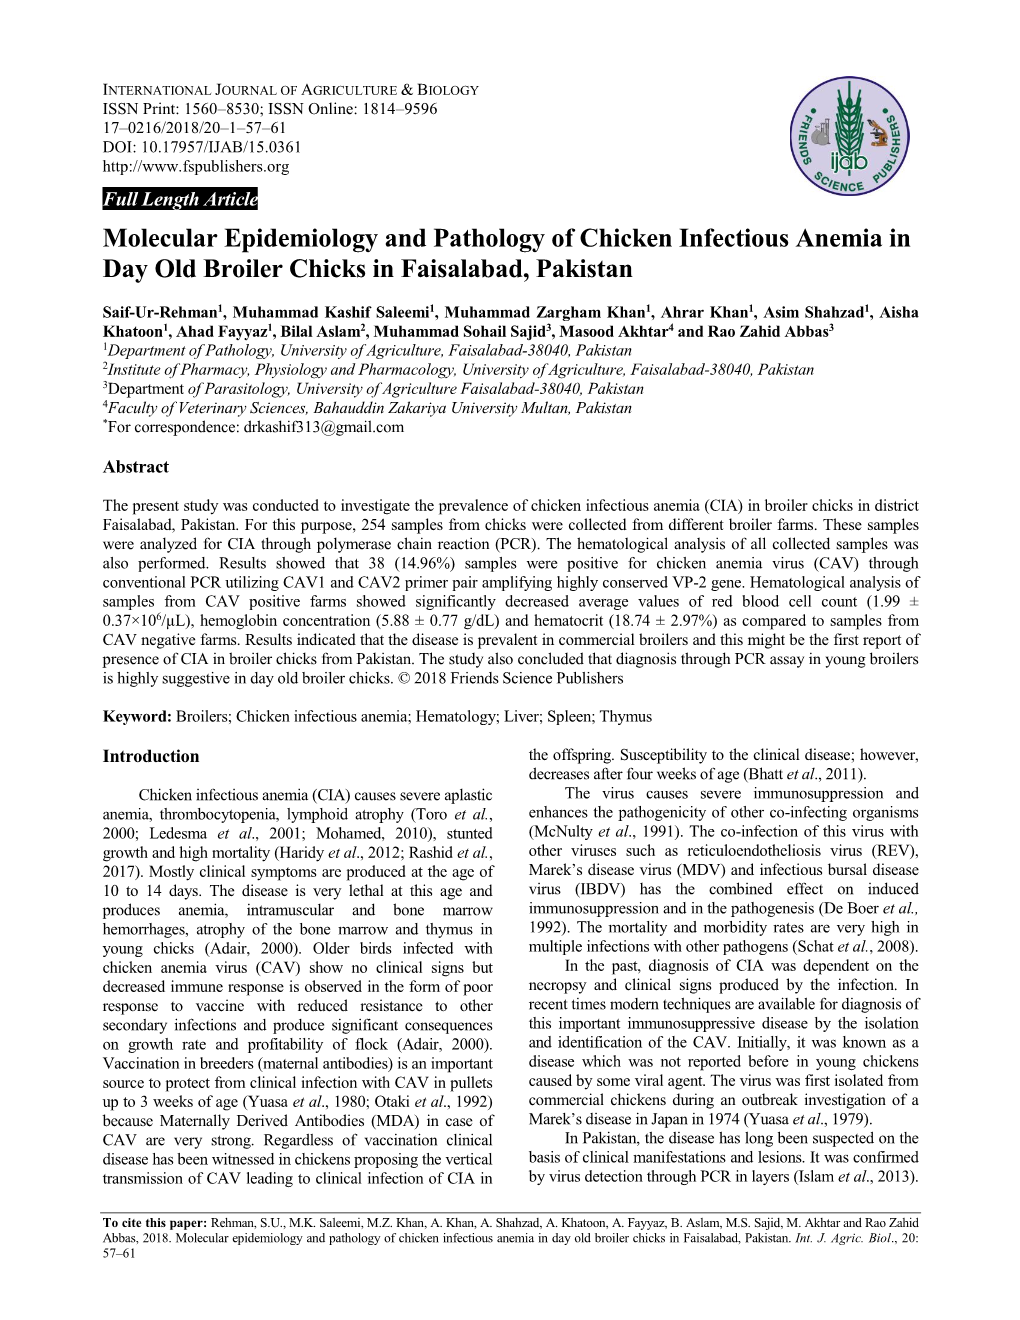 Molecular Epidemiology and Pathology of Chicken Infectious Anemia in Day Old Broiler Chicks in Faisalabad, Pakistan